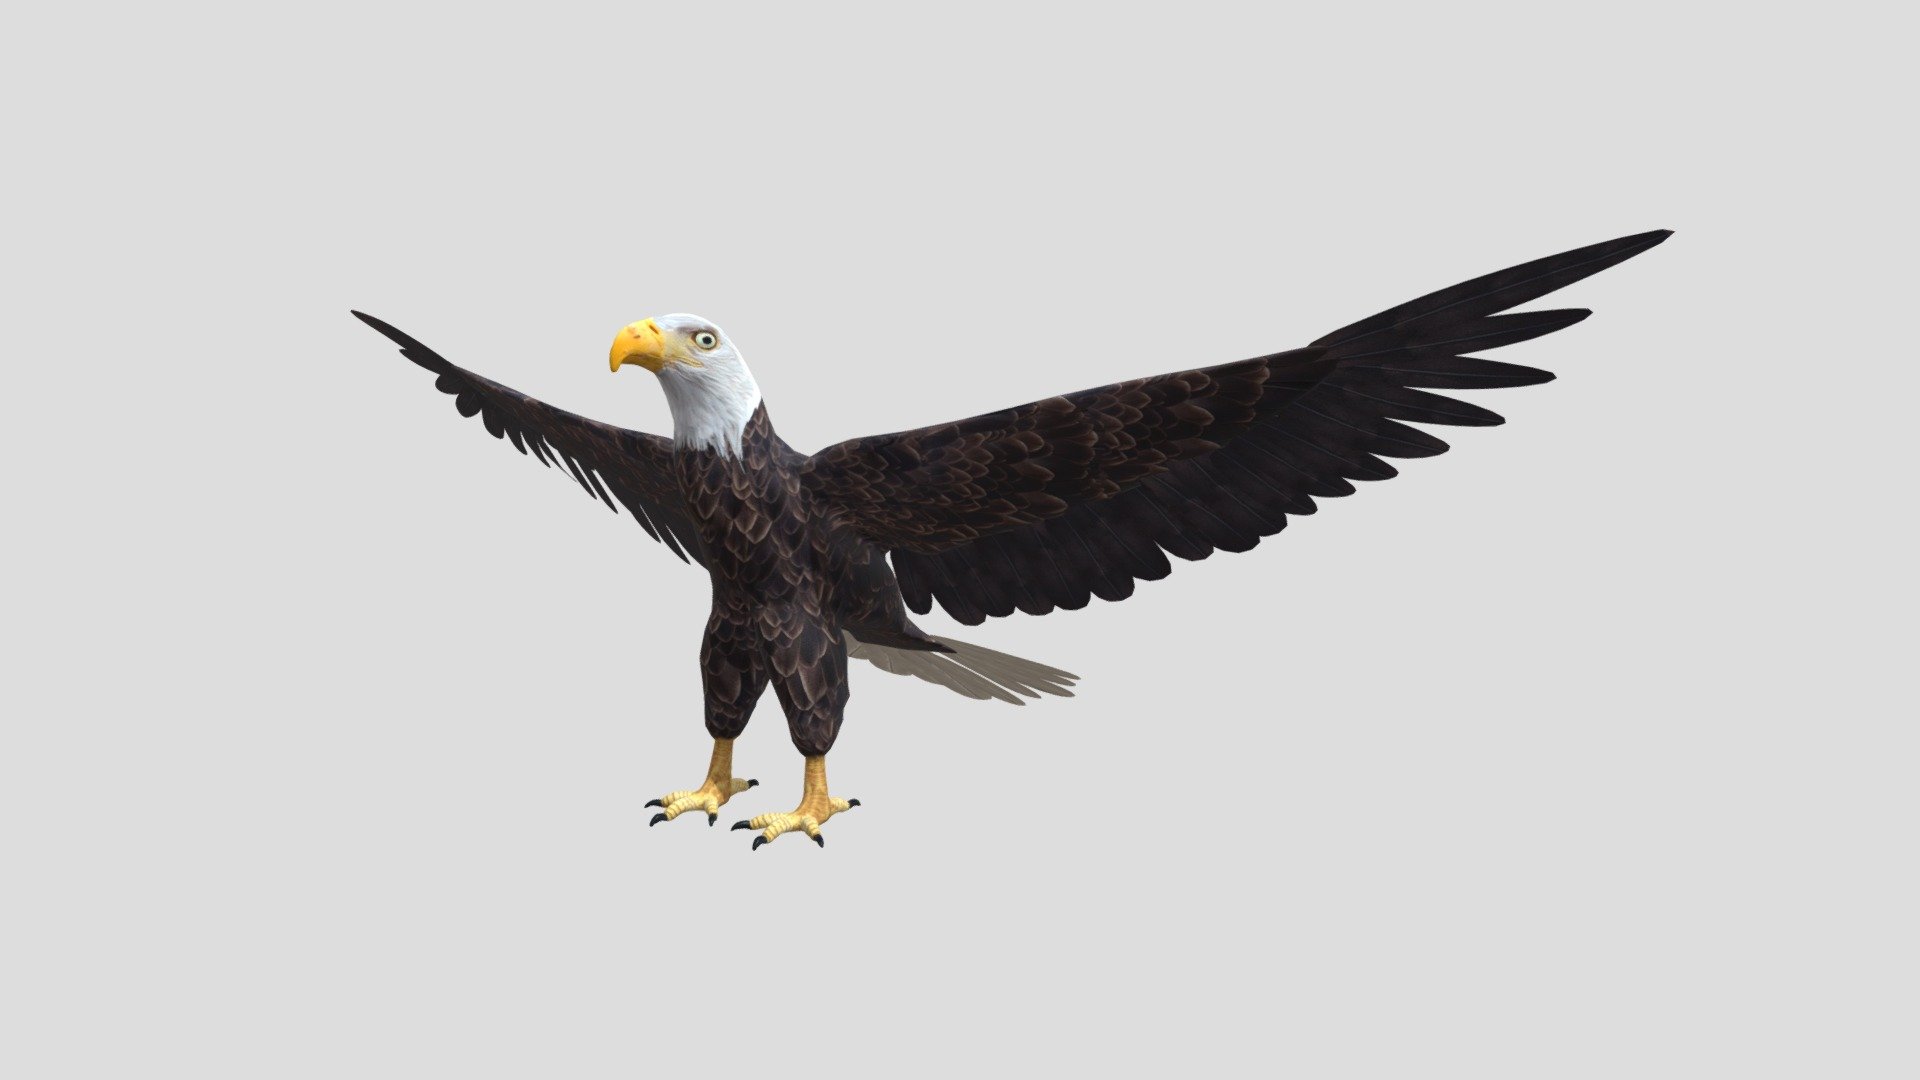 Digital 3d model of Bald eagle.

The product includes:

-The model is one single object

-All textures and materials are mapped in every format.

-Textures JPEG- color,normal and roughness maps

-Texture size 4096 x 4096 pxls.

-No special plugin needed to open scene 3d model